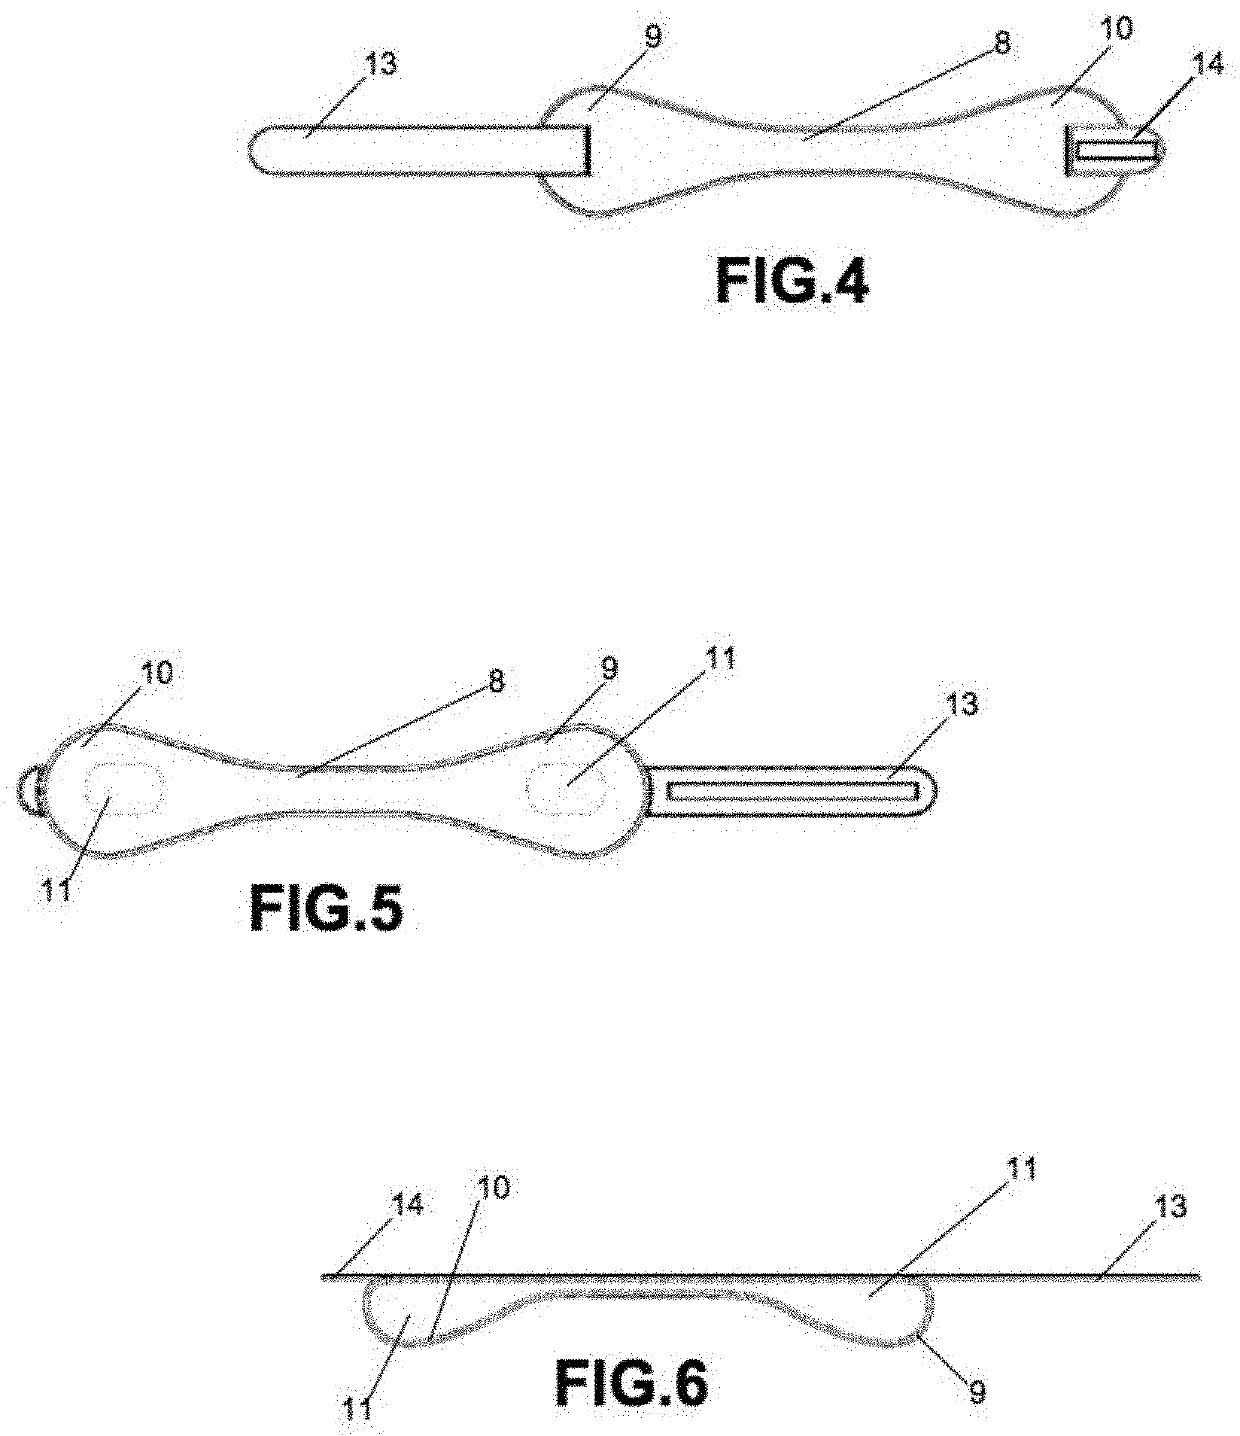 Feminine support device or garment for pregnant mothers' accommodation